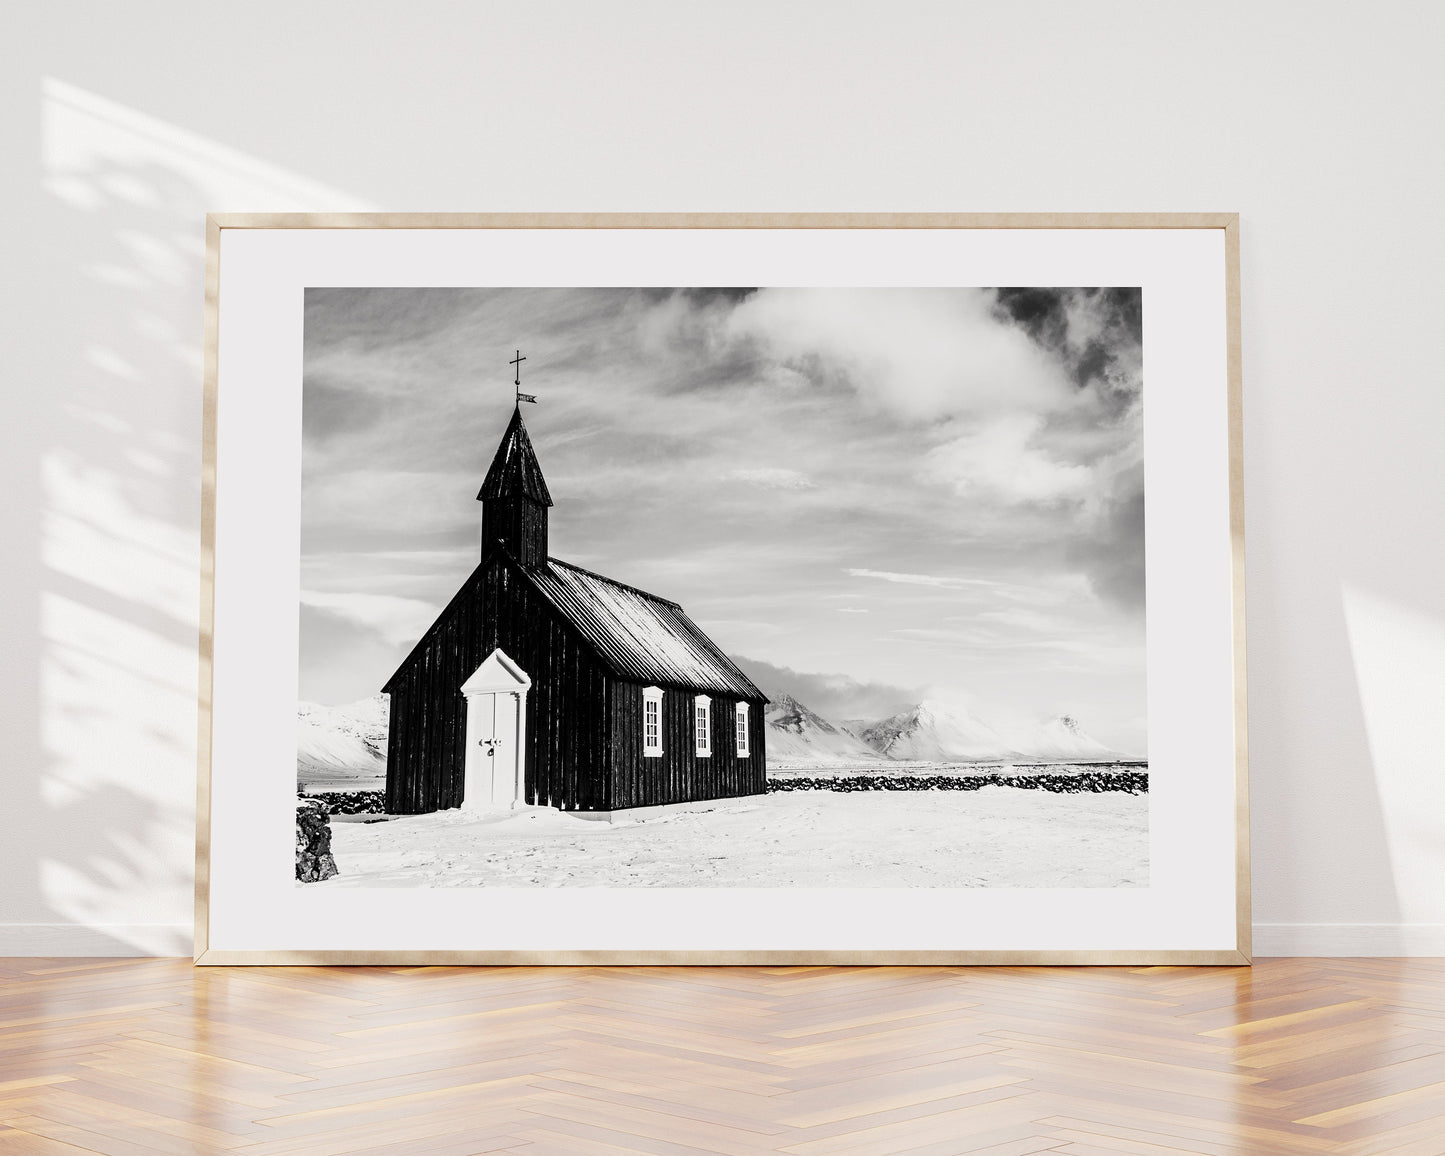 Budir Church Print - Iceland Photography Print - Iceland Wall Art - Iceland Poster - Black and White Photography - Landscape - Black Church